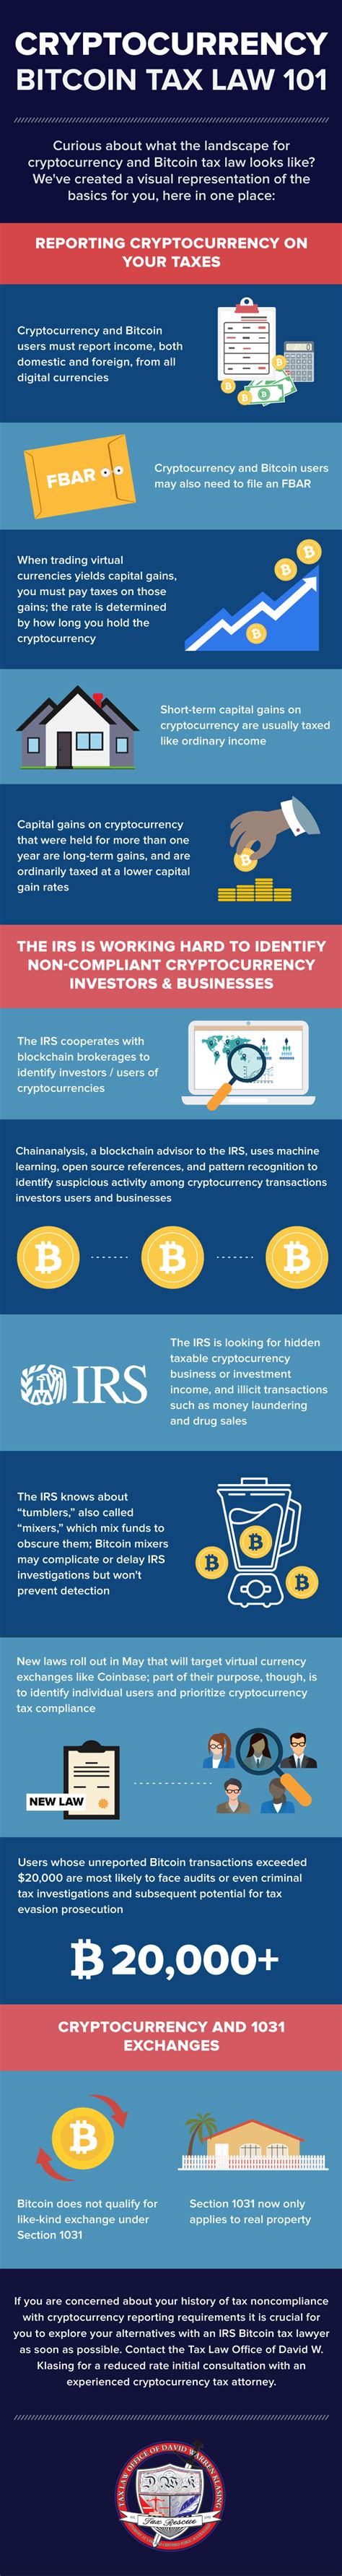 Crypto tax season is right around the corner. Cryptocurrency and Bitcoin Tax Law 101